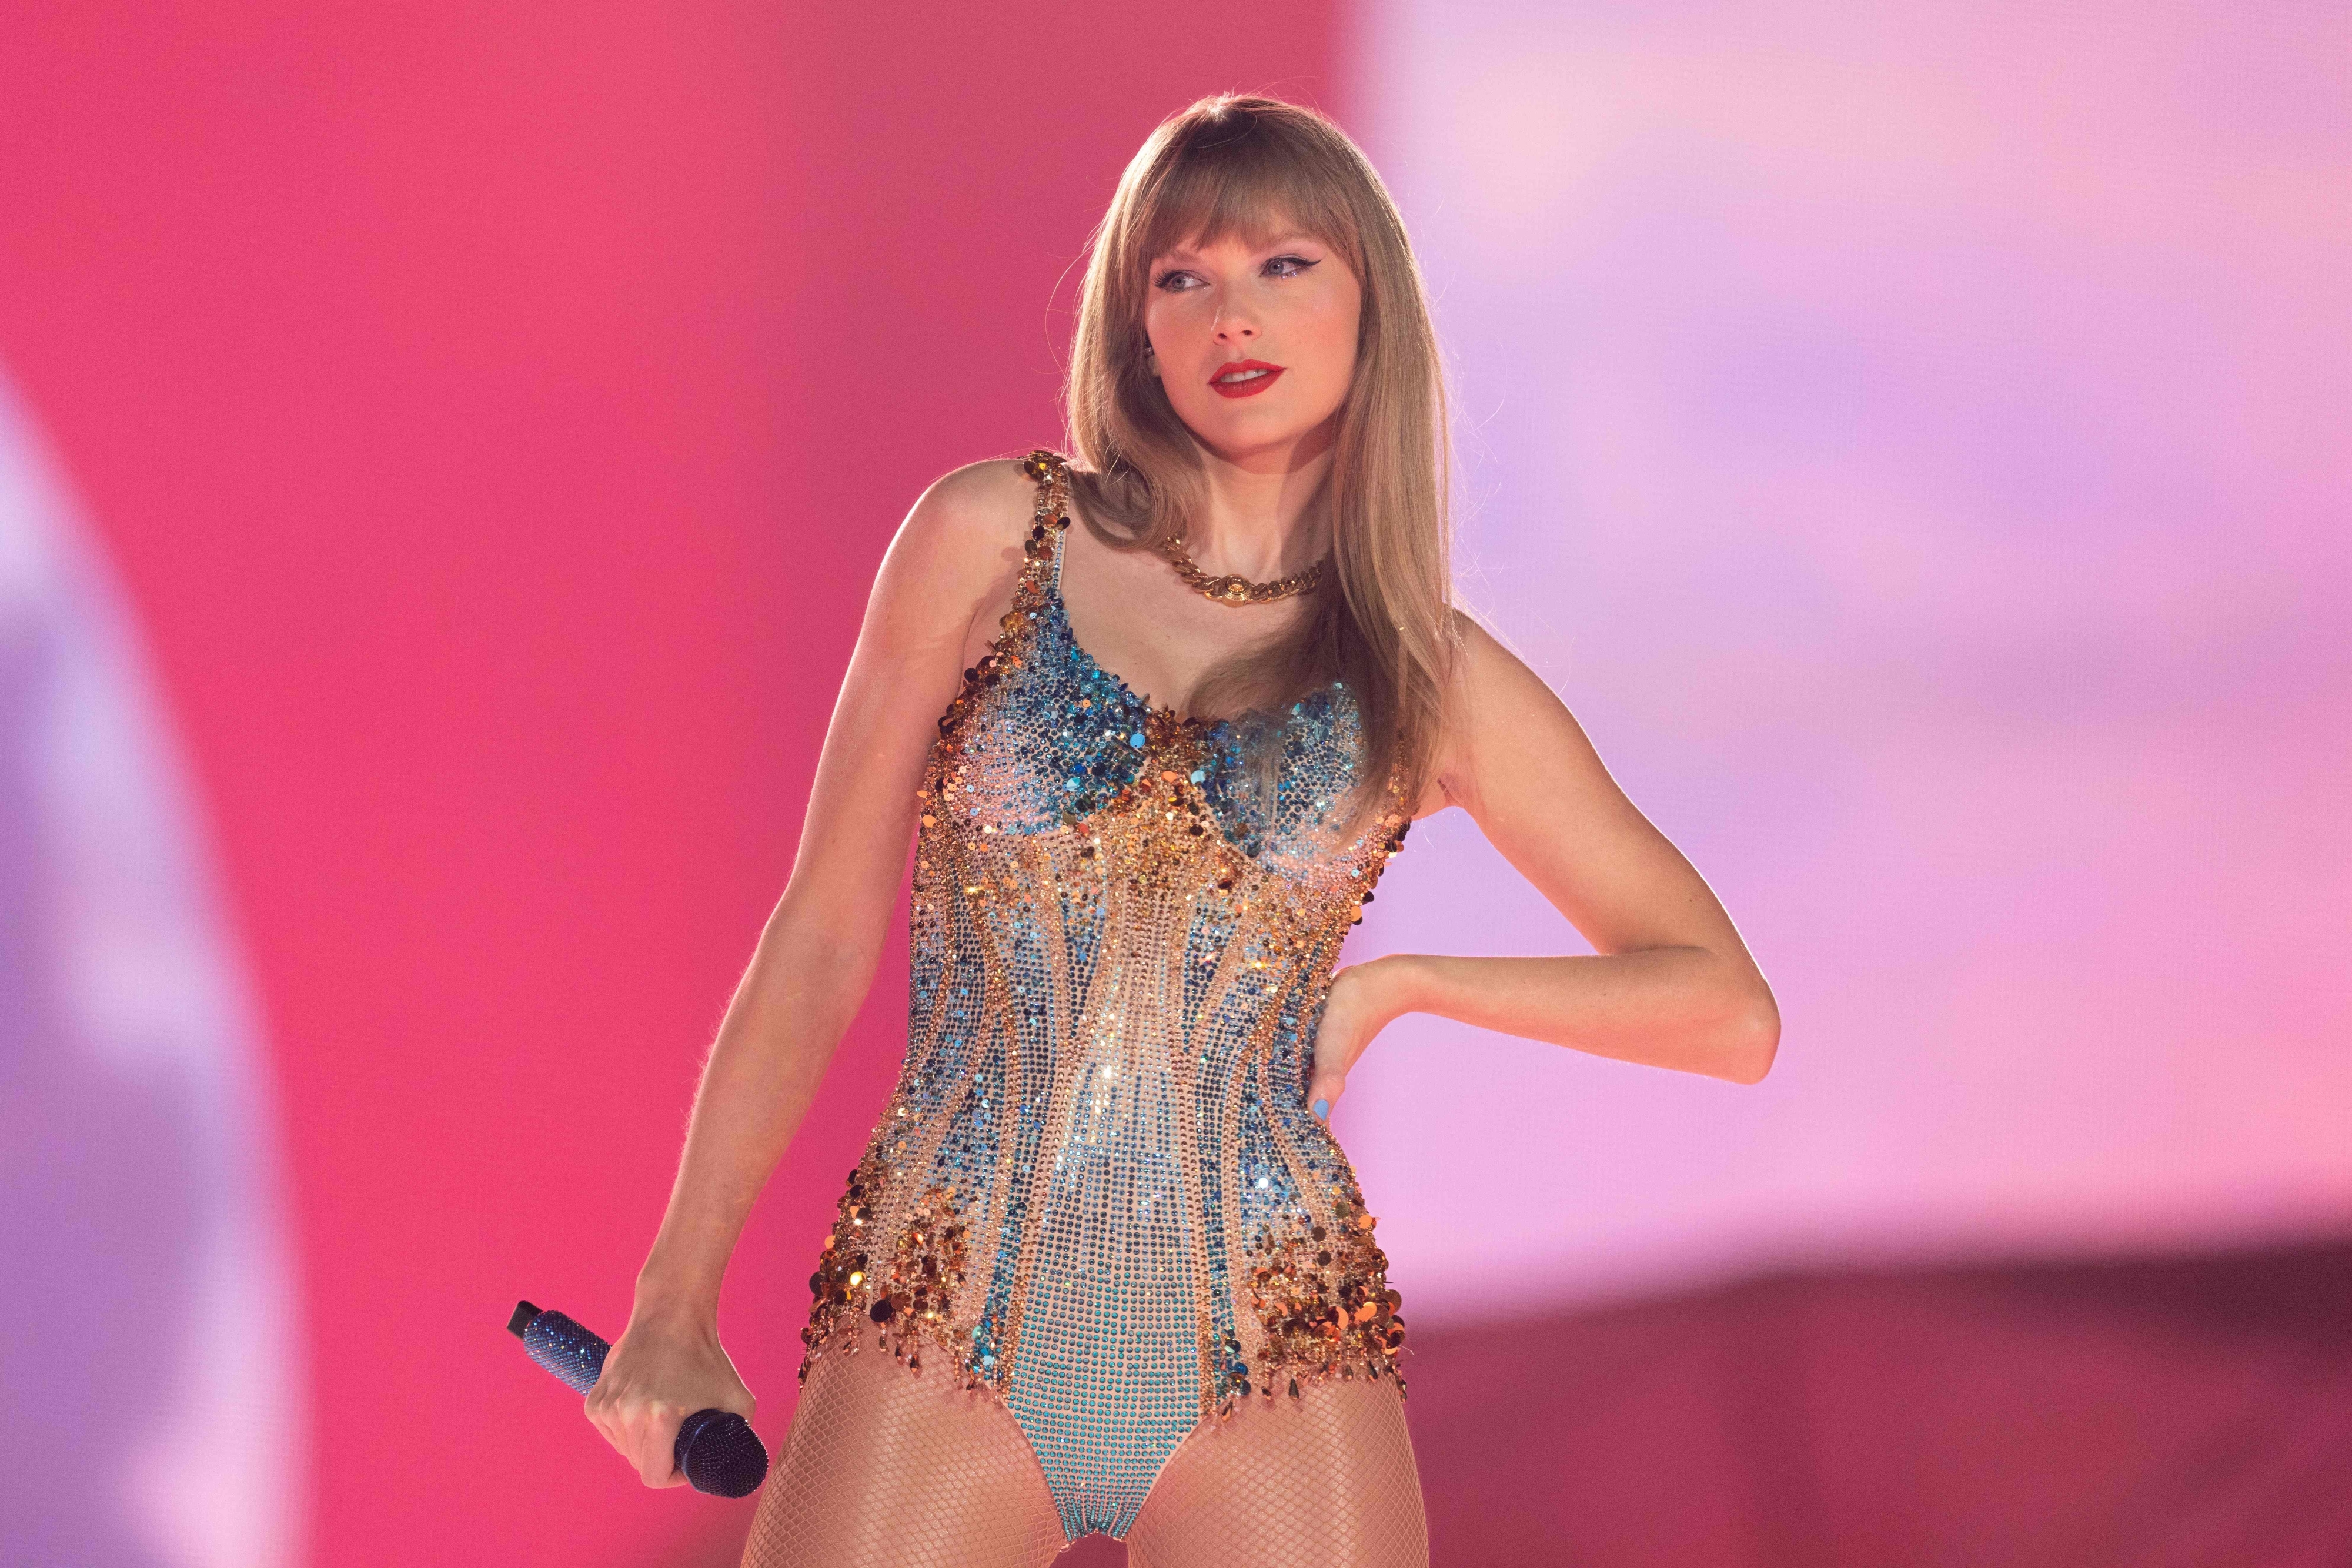 Close-up of Taylor performing in a sparkly bodysuit